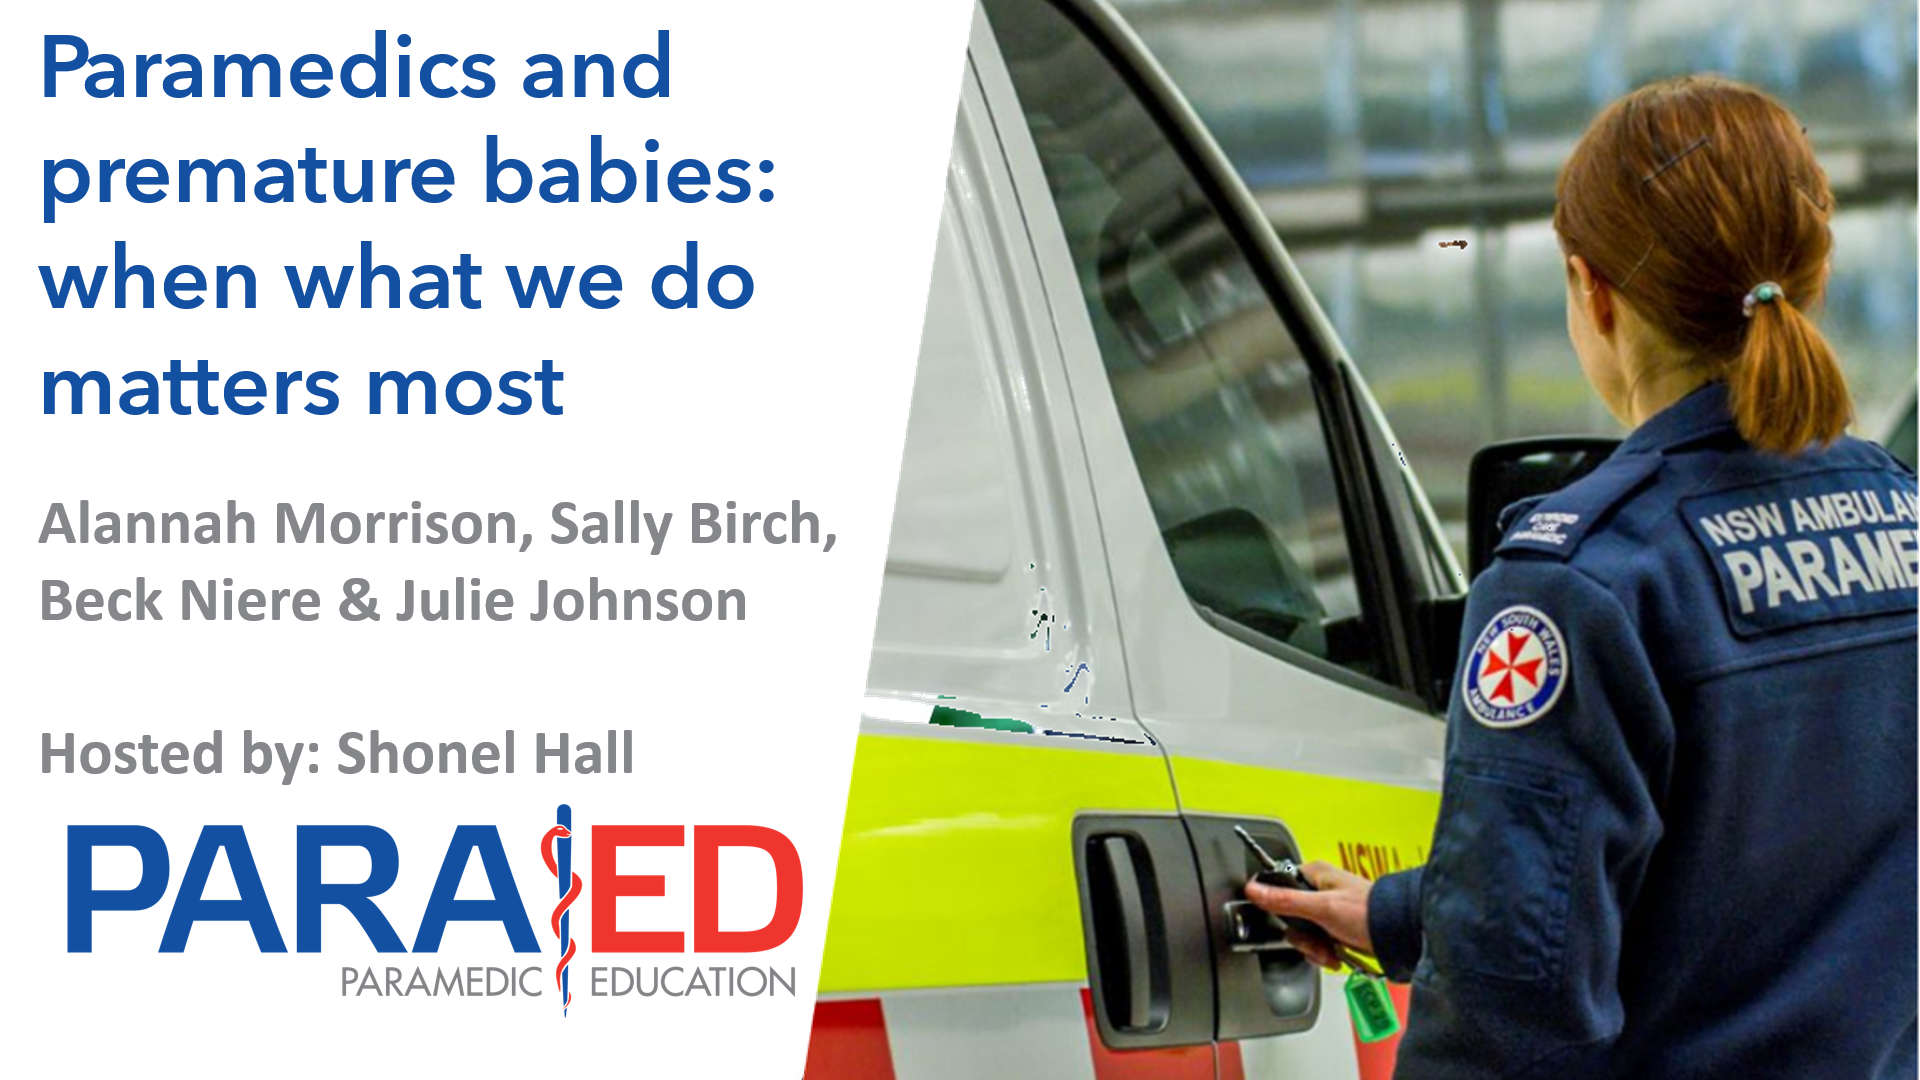 Paramedics and premature babies: when what we do matters most